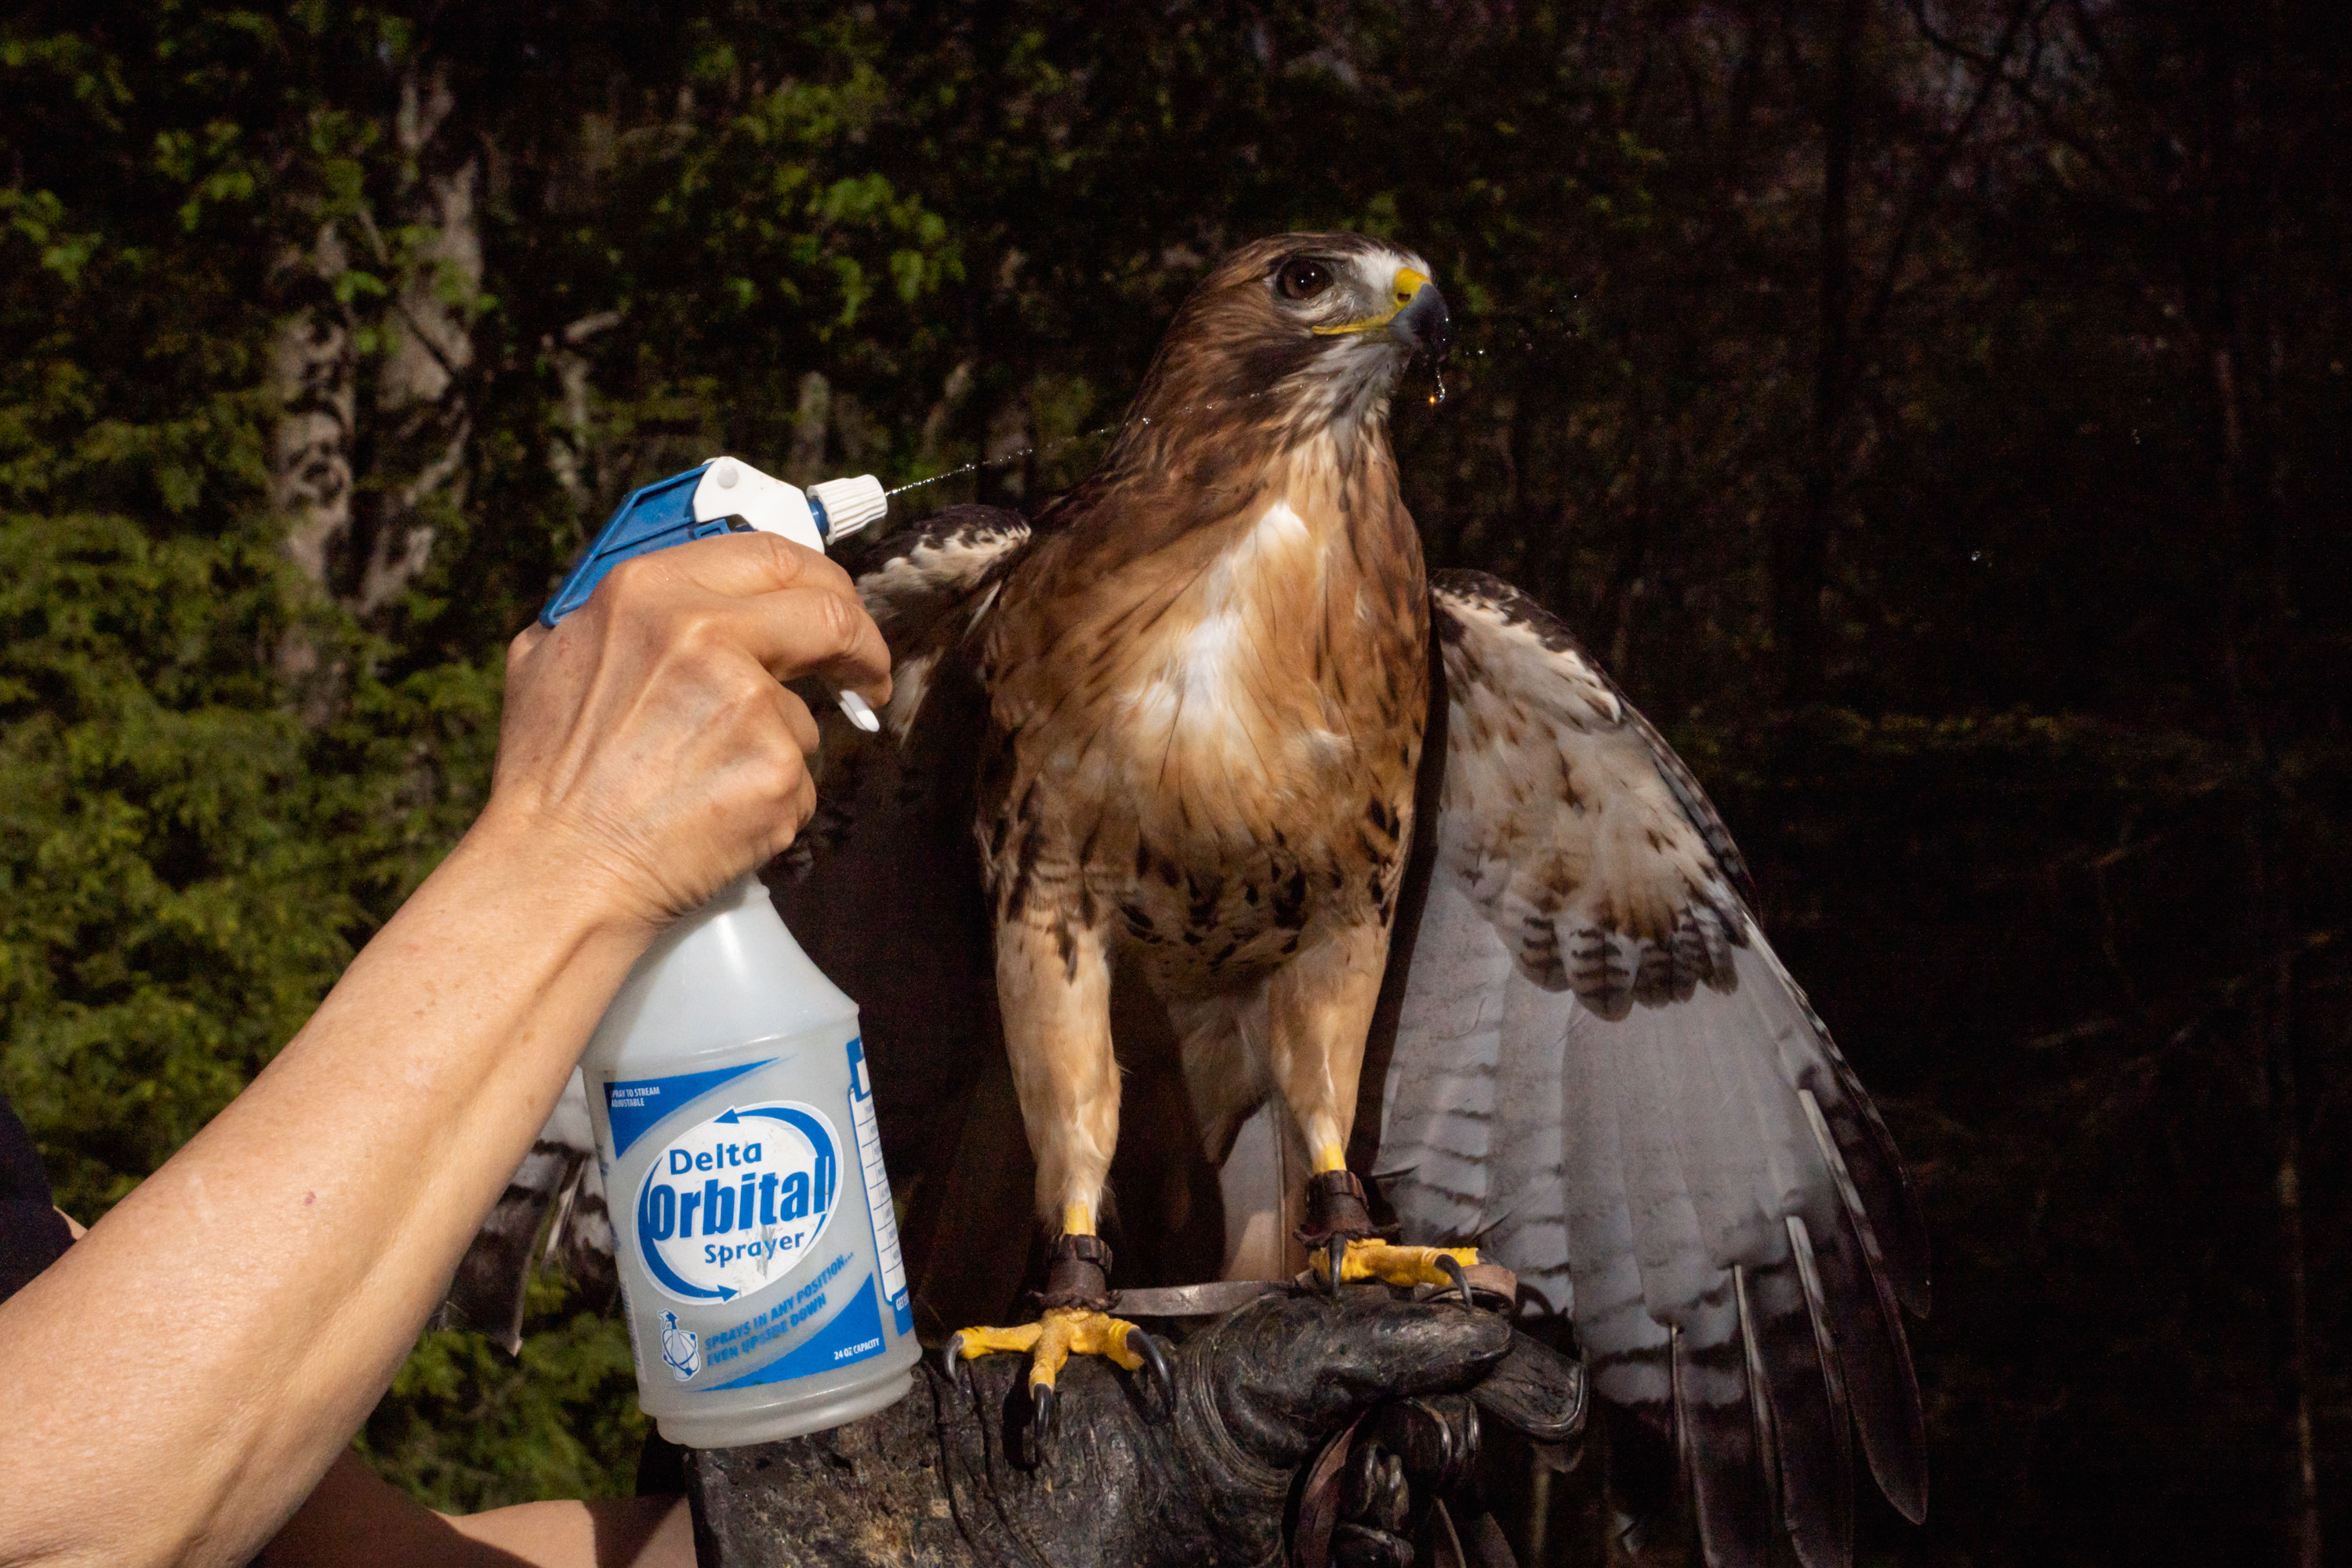 A person gives a falcon a drink from a spray bottle labeled &quot;Delta Orbital Sprayer&quot;